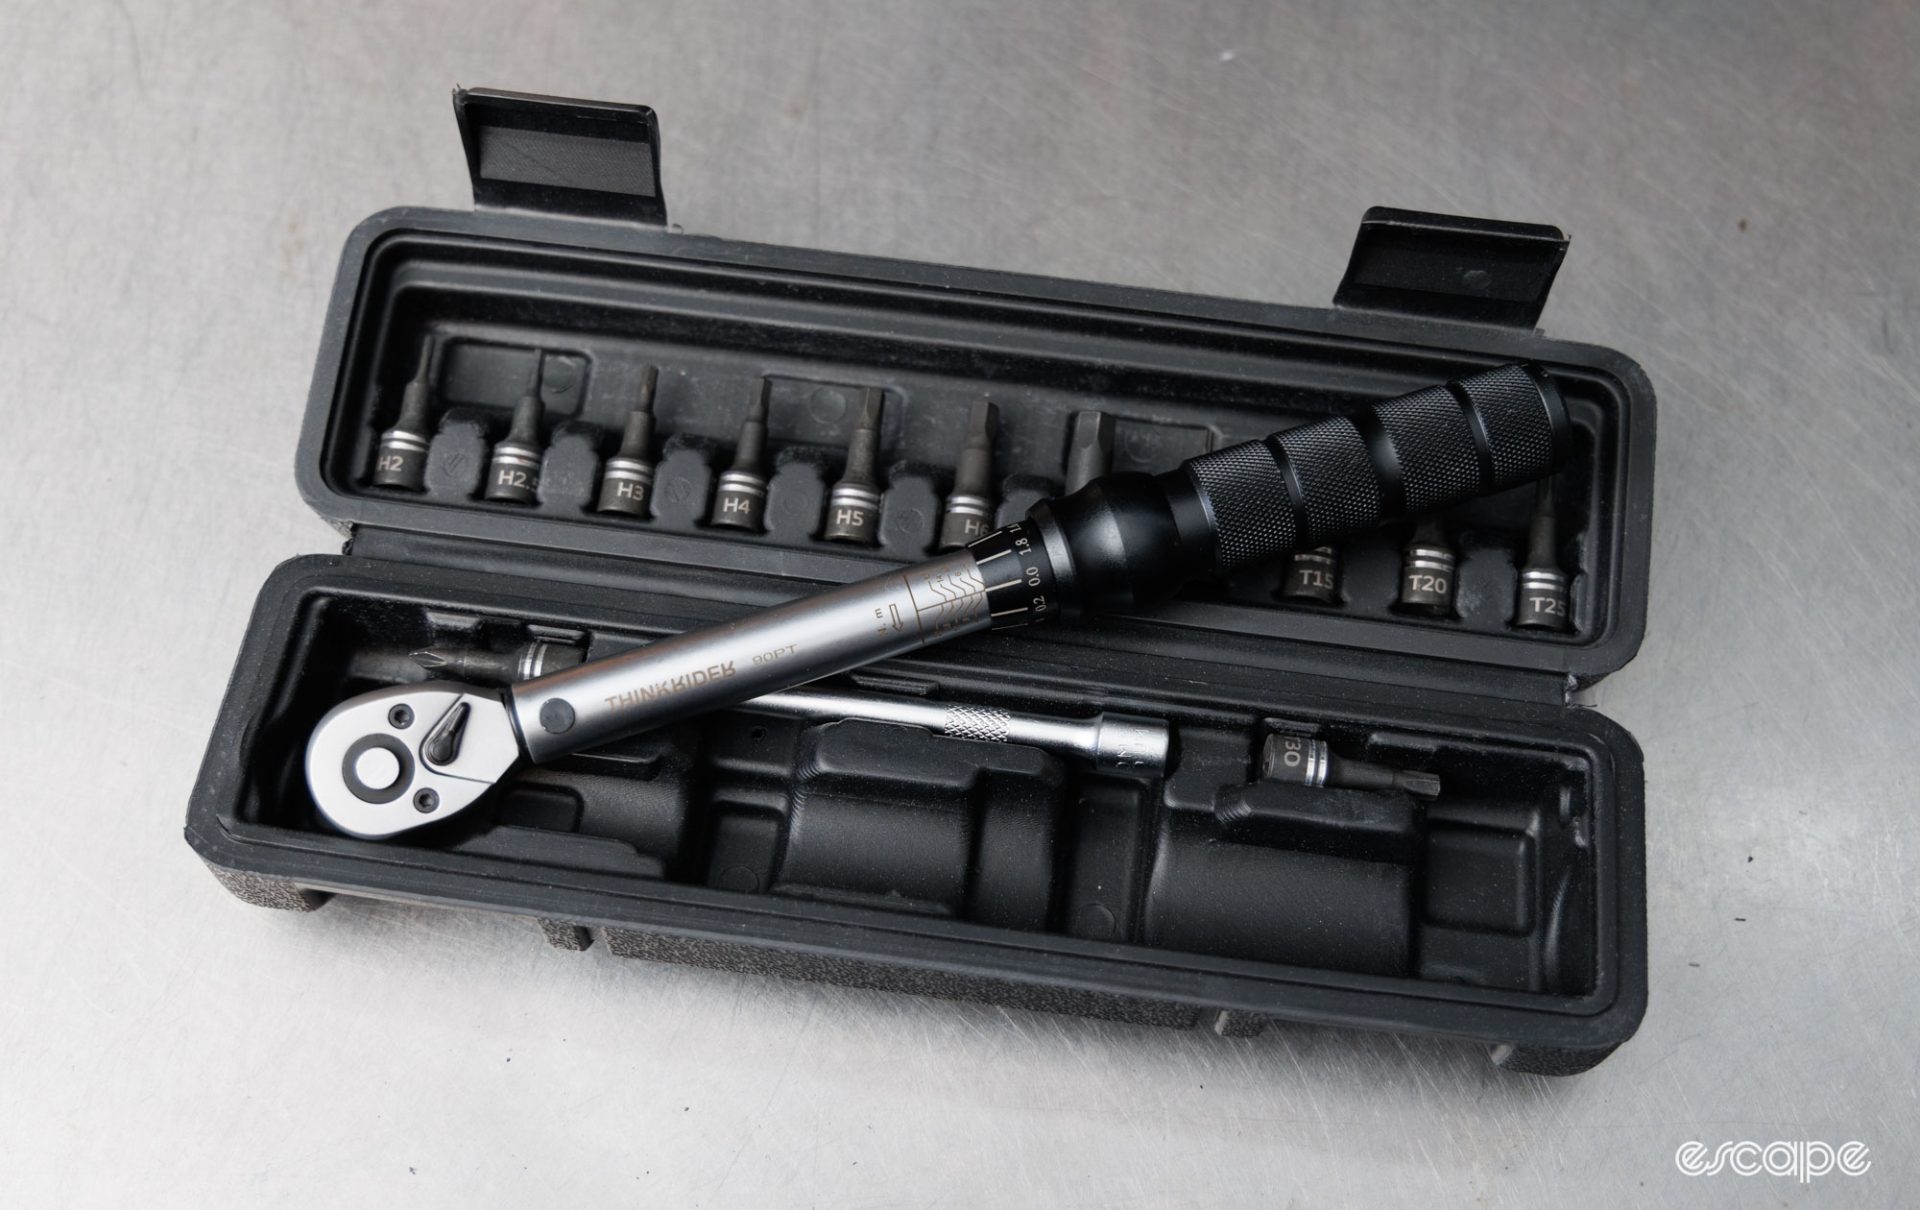 ThinkRider torque wrench sitting on its black plastic blow mould case with sockets. 